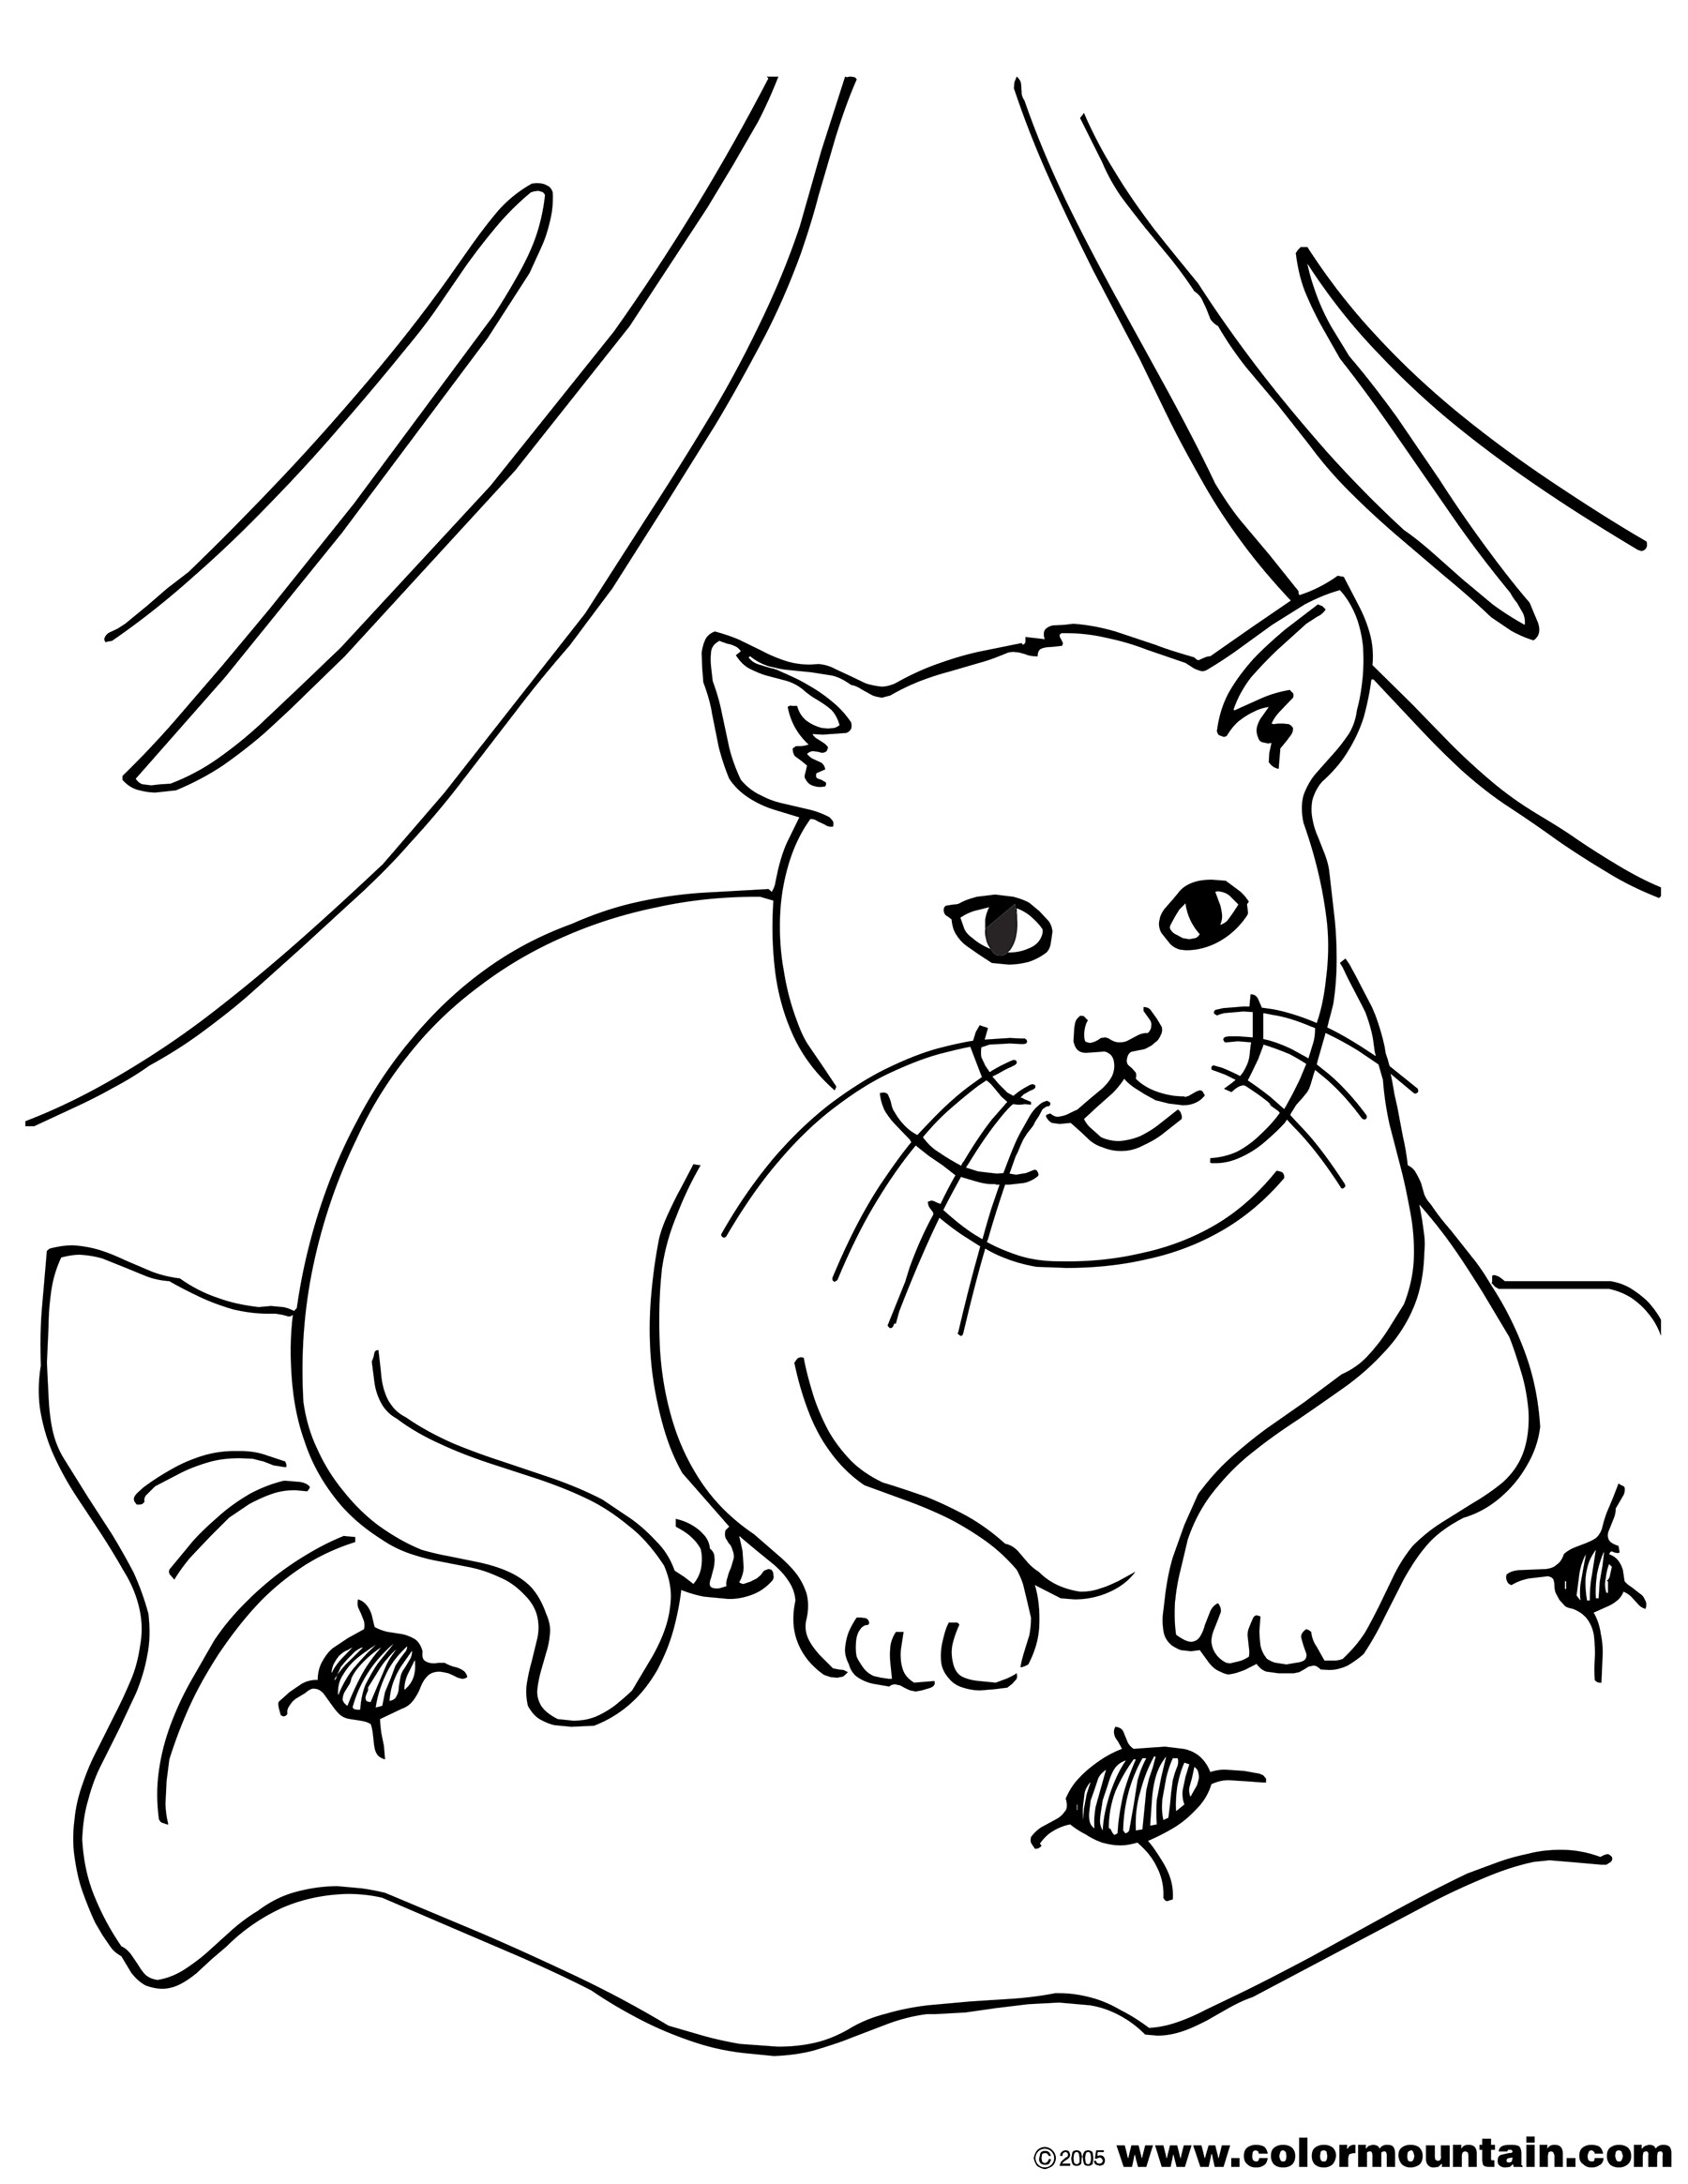 Coloring Home - Tons of Free Coloring Pages - Coloring Home